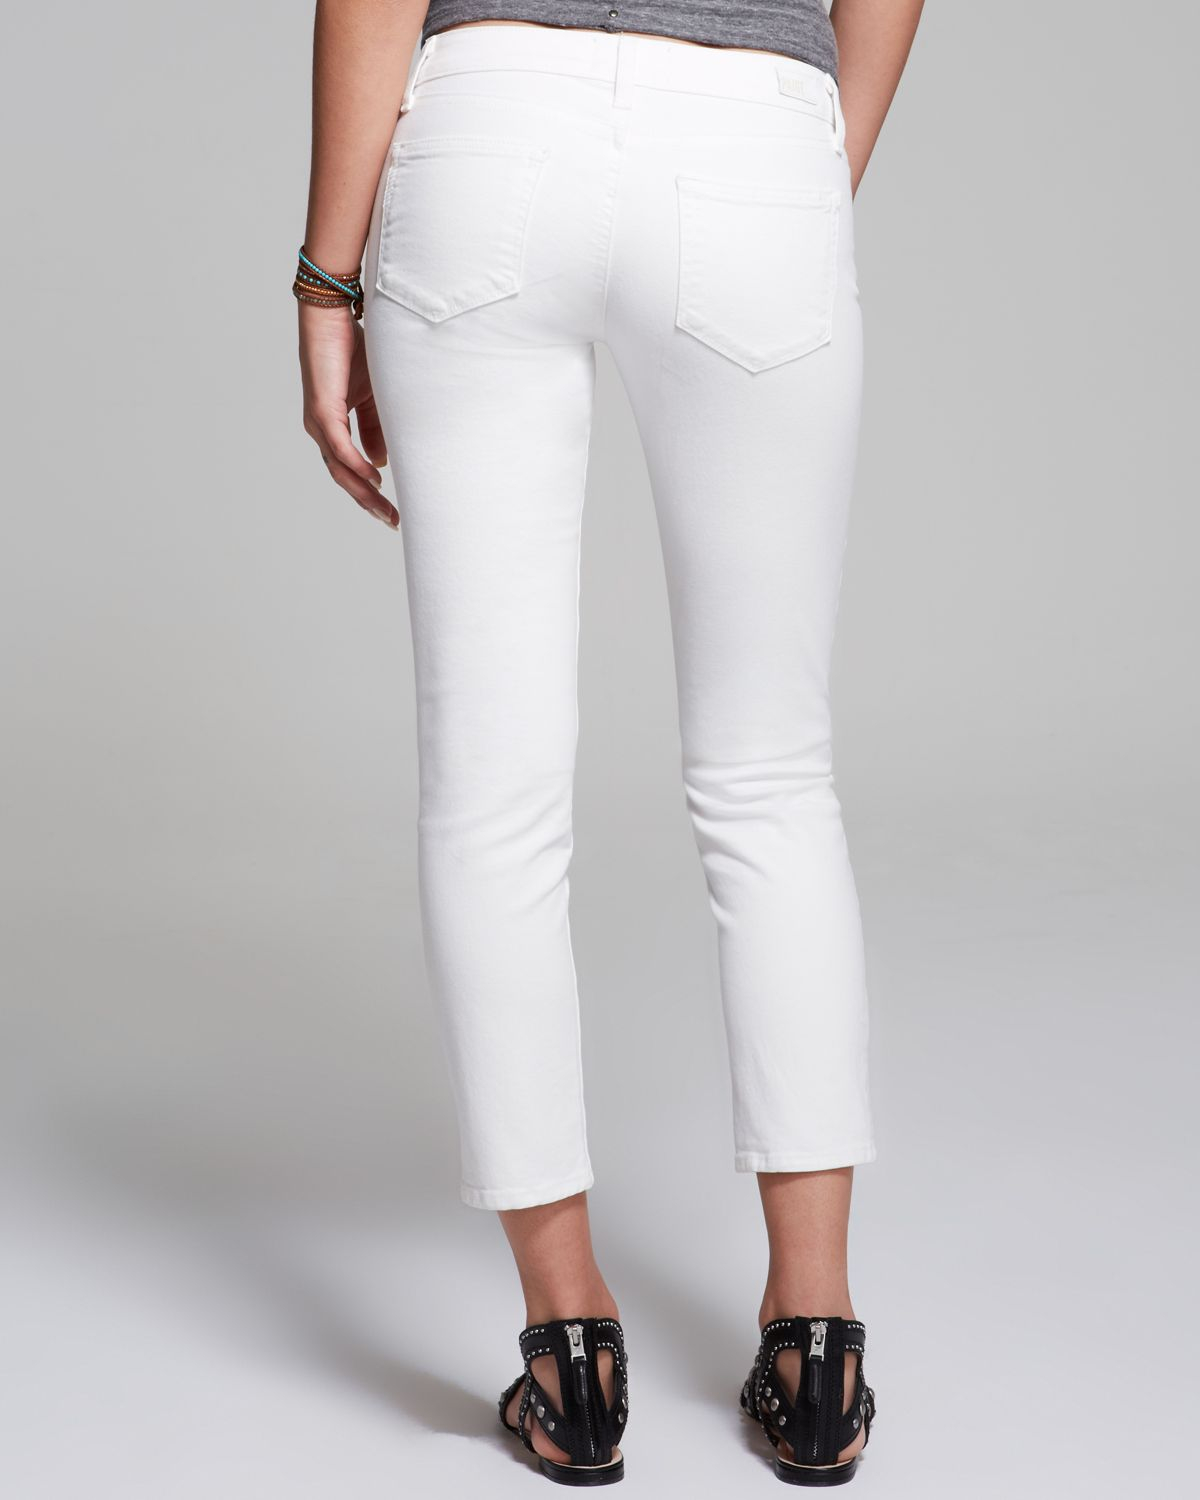 PAIGE Jeans - Kylie Crop In Optic White - Lyst